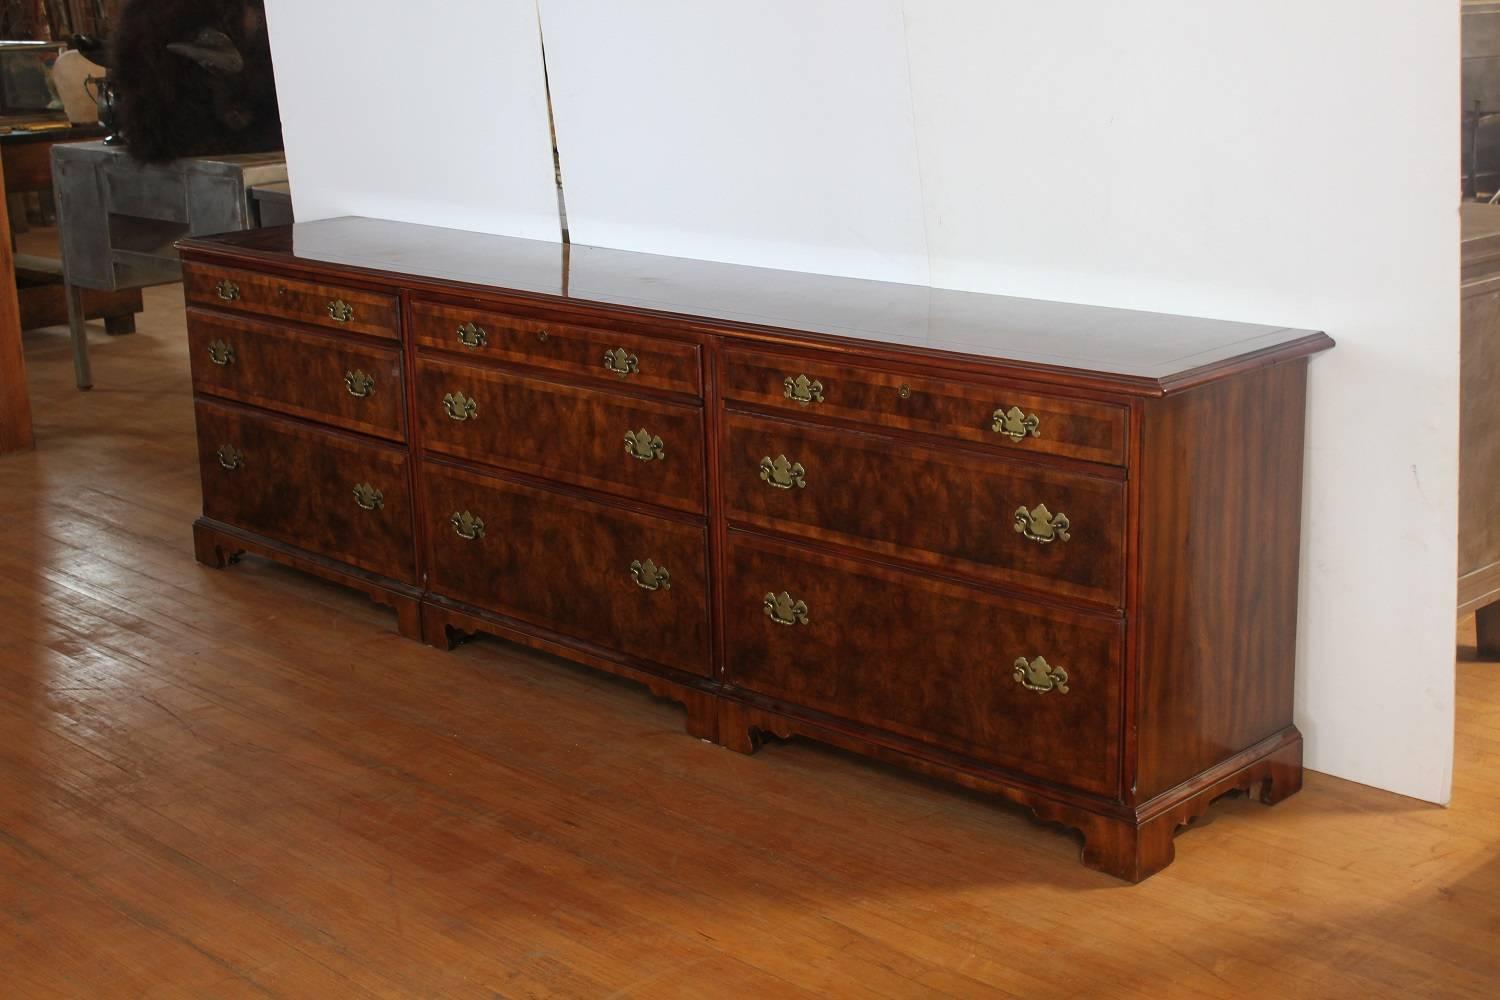 9ft long walnut credenza by Widdicomb with brass hardware. It has brass designer tag.